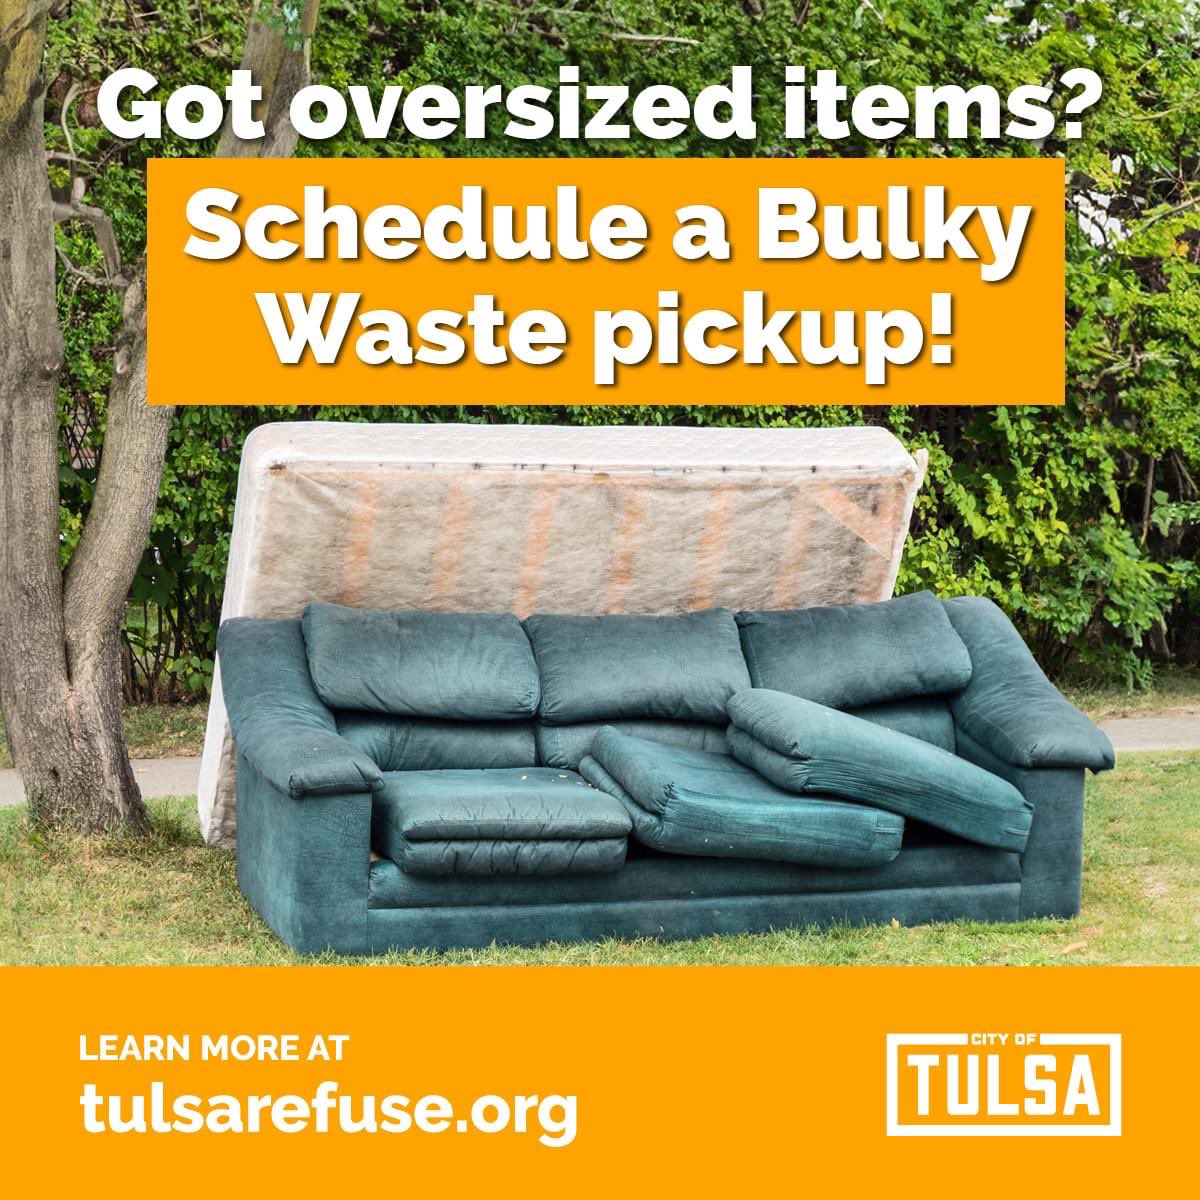 Wondering what to do with the oversized items that won't fit in your trash bin? You can arrange for a bulky waste pickup right at your curb on your regular trash day. For details on accepted items or to schedule a bulky waste pickup, call 311 or visit cityoftulsa.org/bulkywaste.